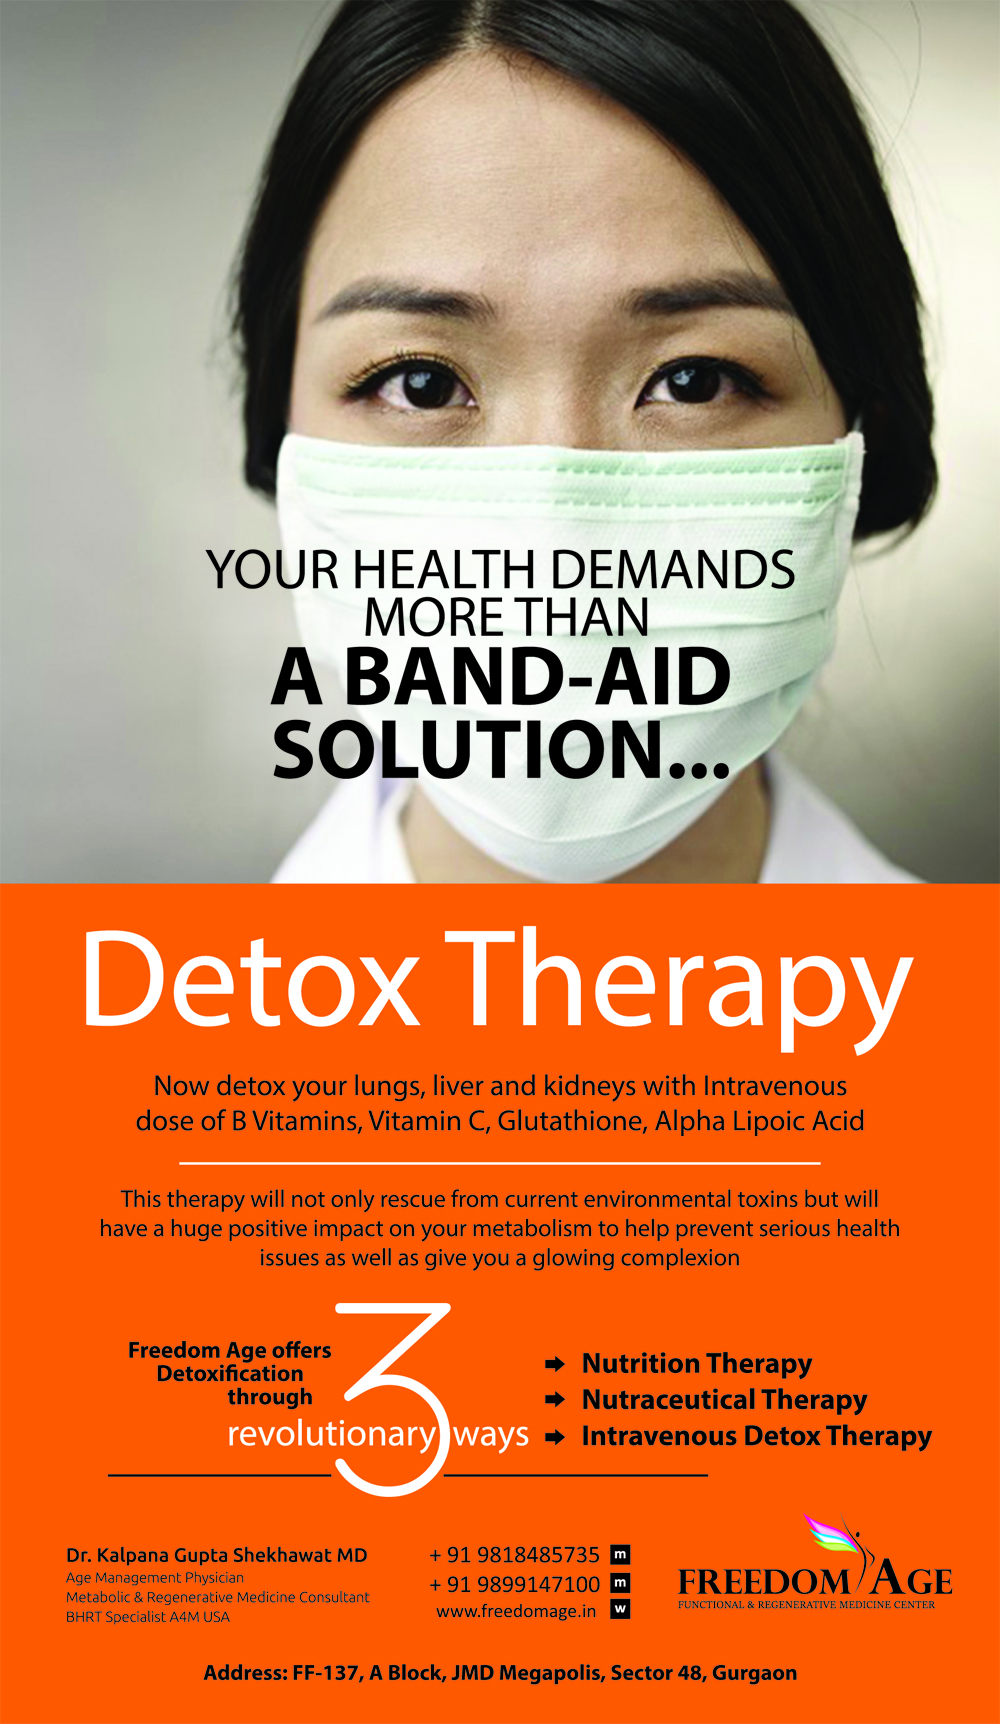 Freedom Age : Nutrition Therapy, Detox Therapy Clinic in Gurgaon